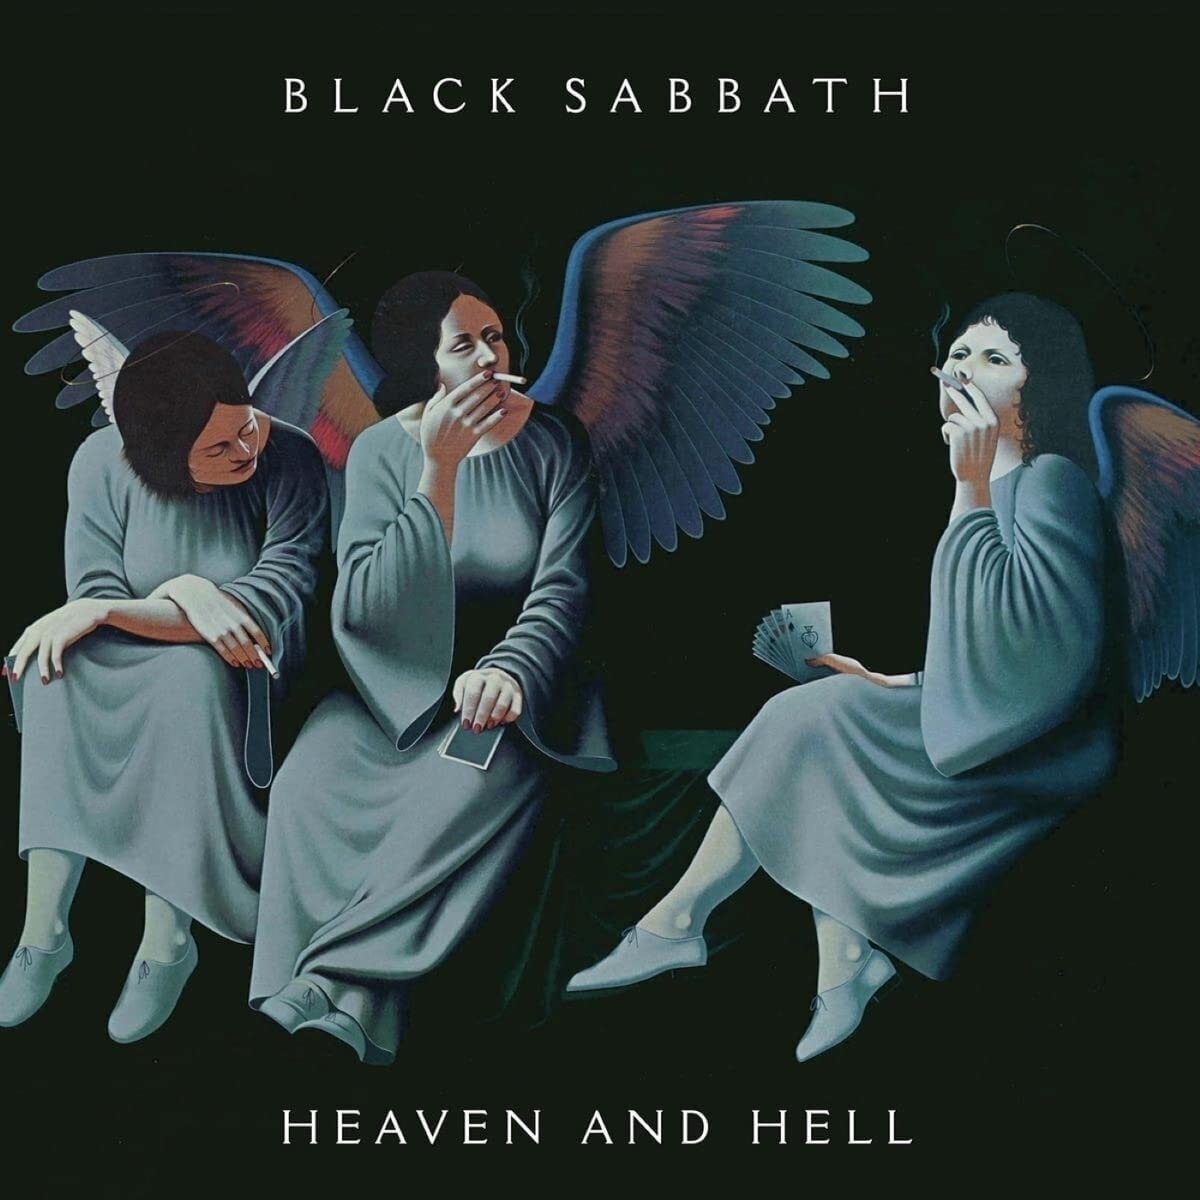 Hudobné CD Black Sabbath - Heaven And Hell (Reissue) (Remastered) (Deluxe Edition) (2 CD)